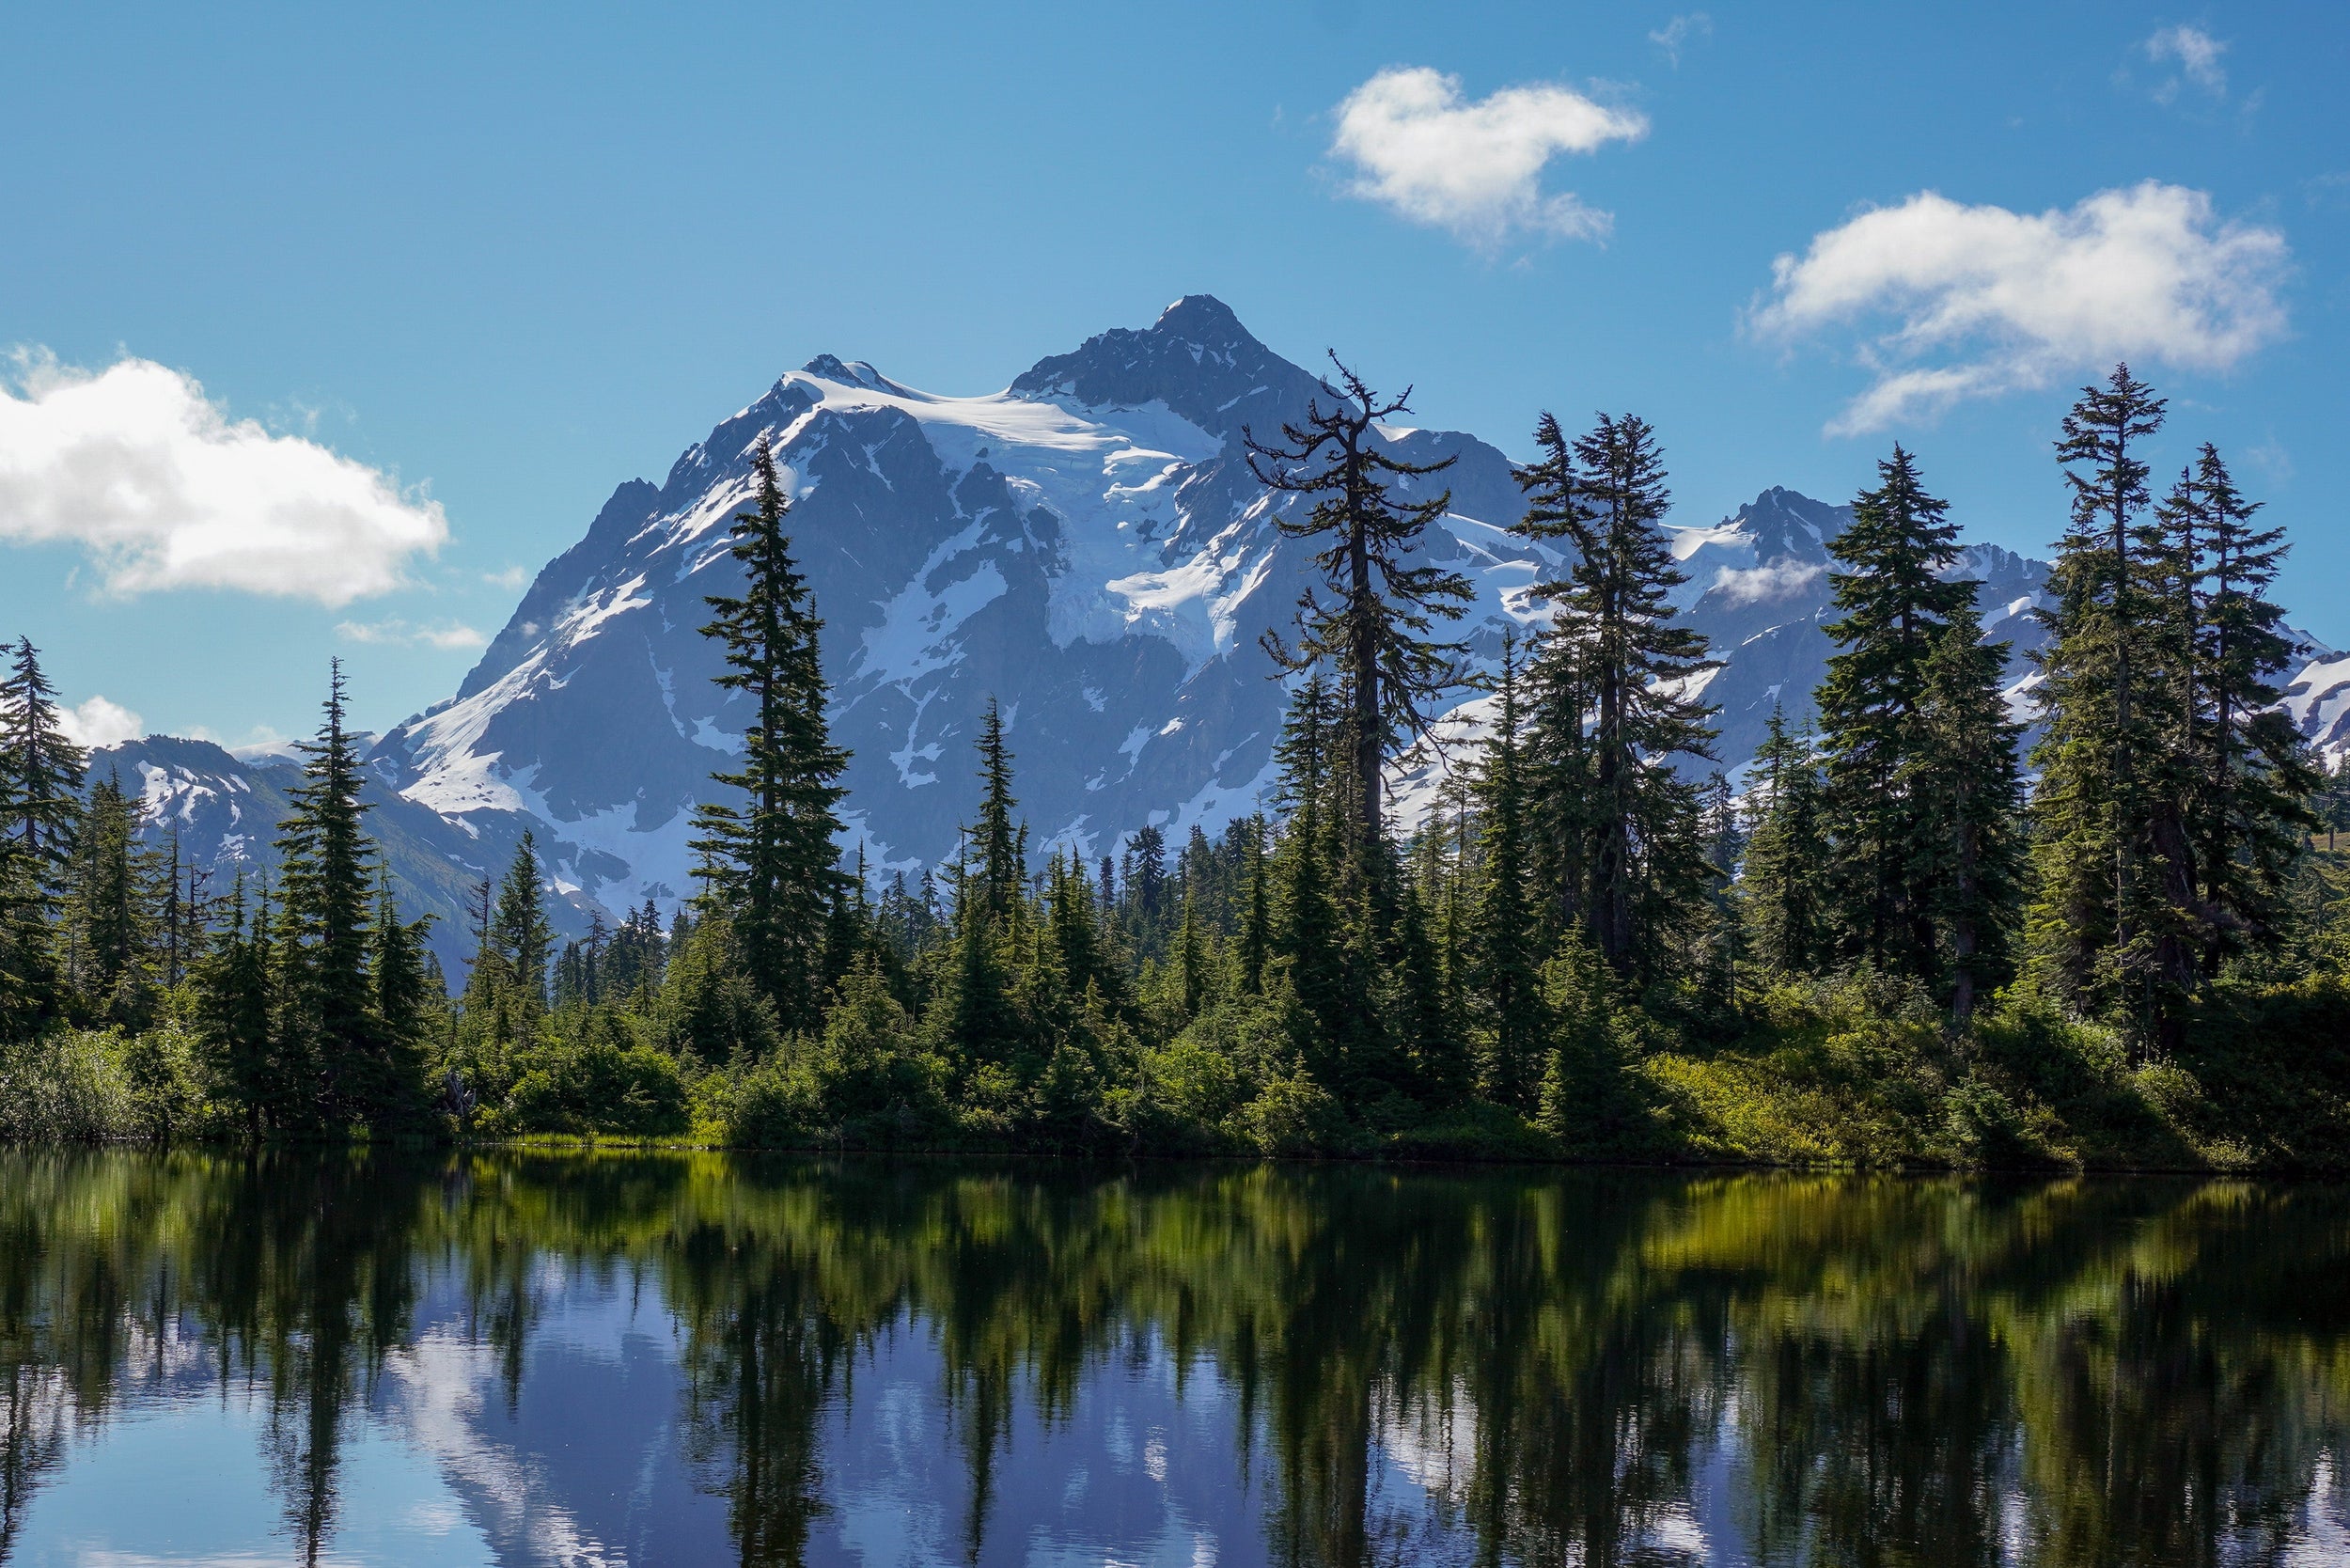 Lake with Mt Shuksan in the background during the summer